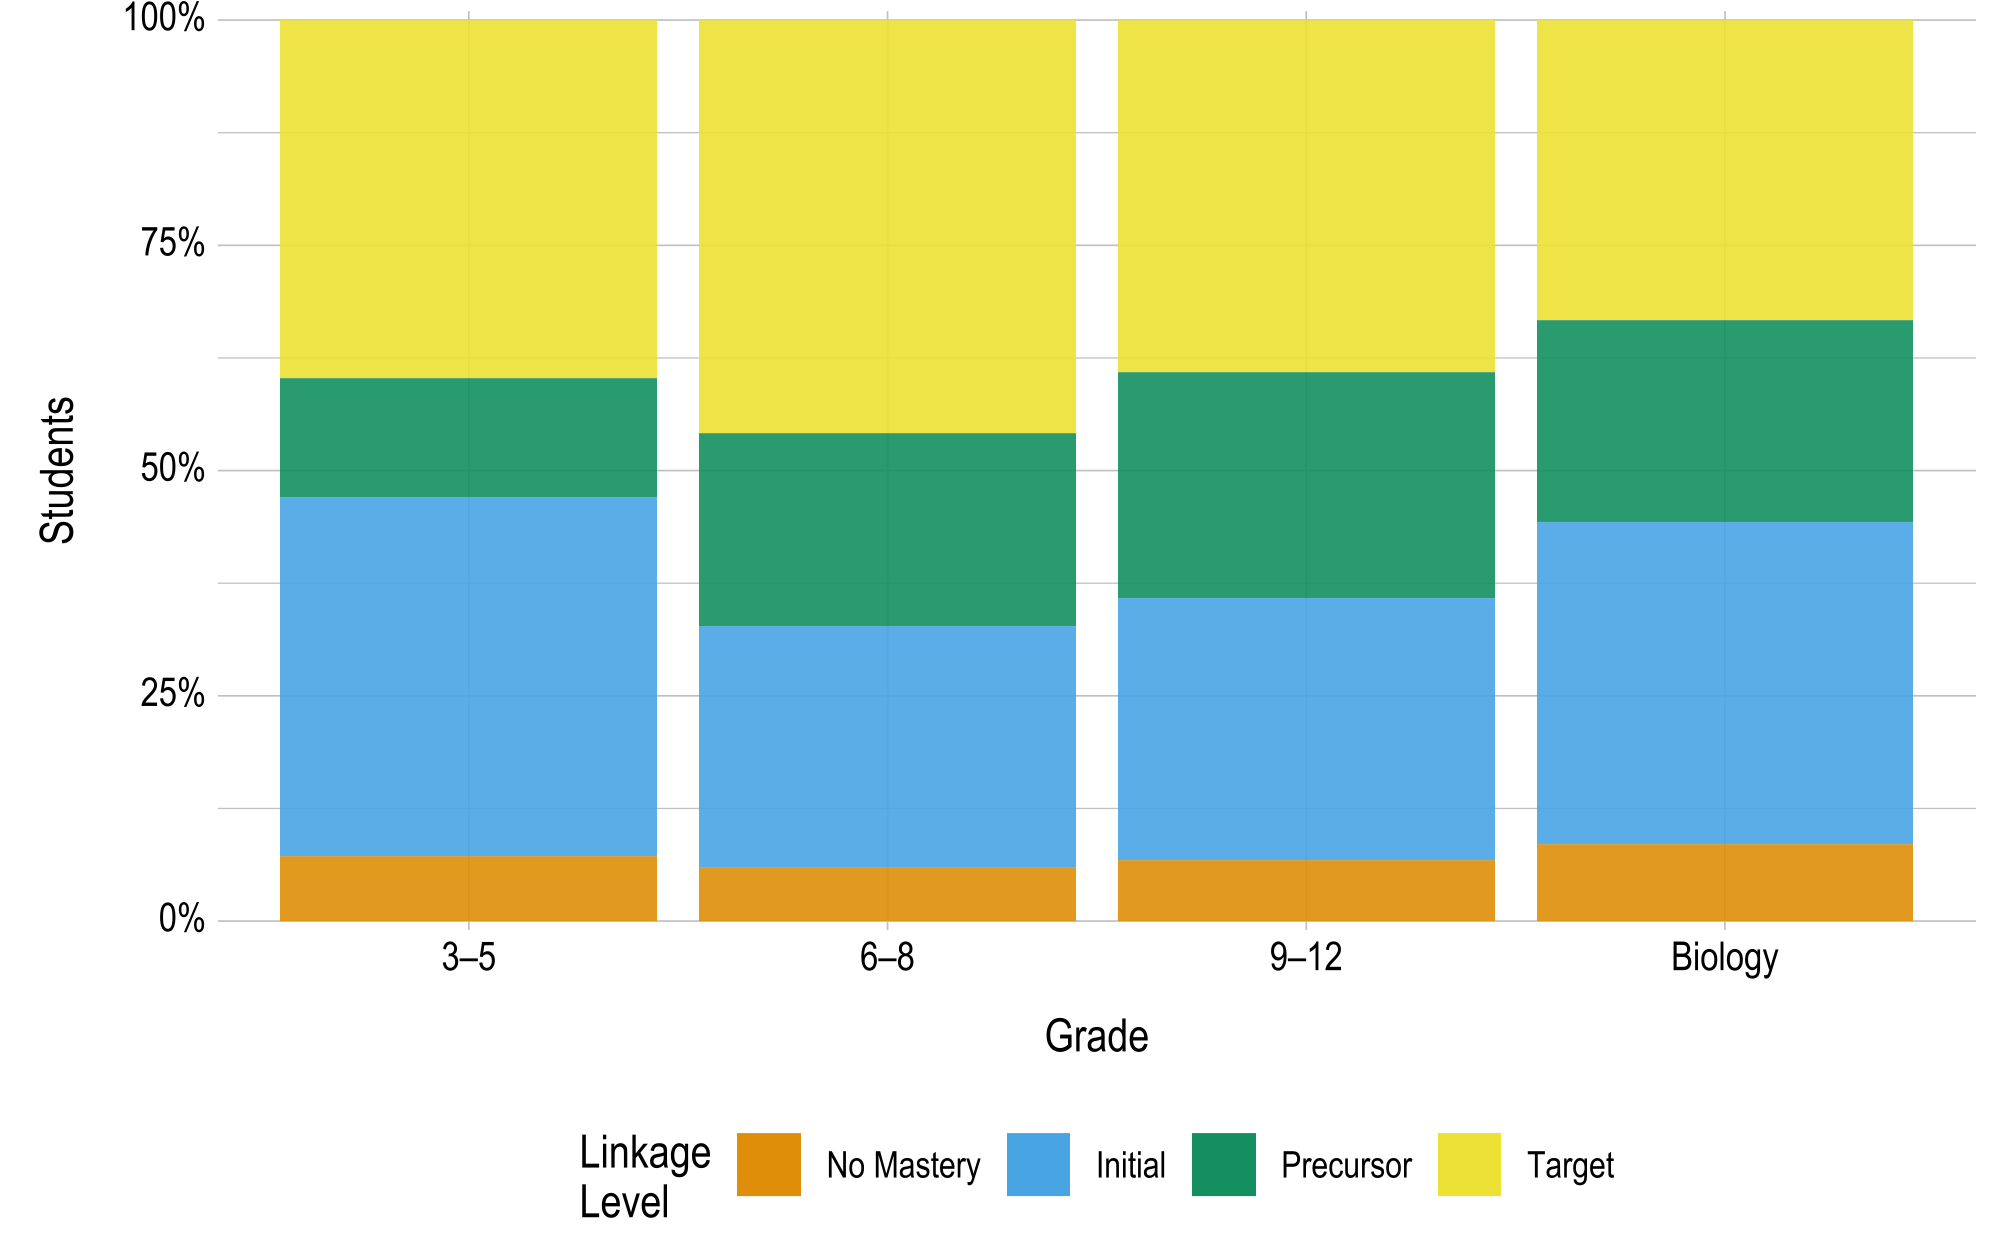 A set of stacked bar charts. There is a bar chart for each grade, and the stacks within each bar chart represent a linkage level and the percentage of students who mastered that linkage level as their highest level. The highest linkage level for most students was below the Target level.